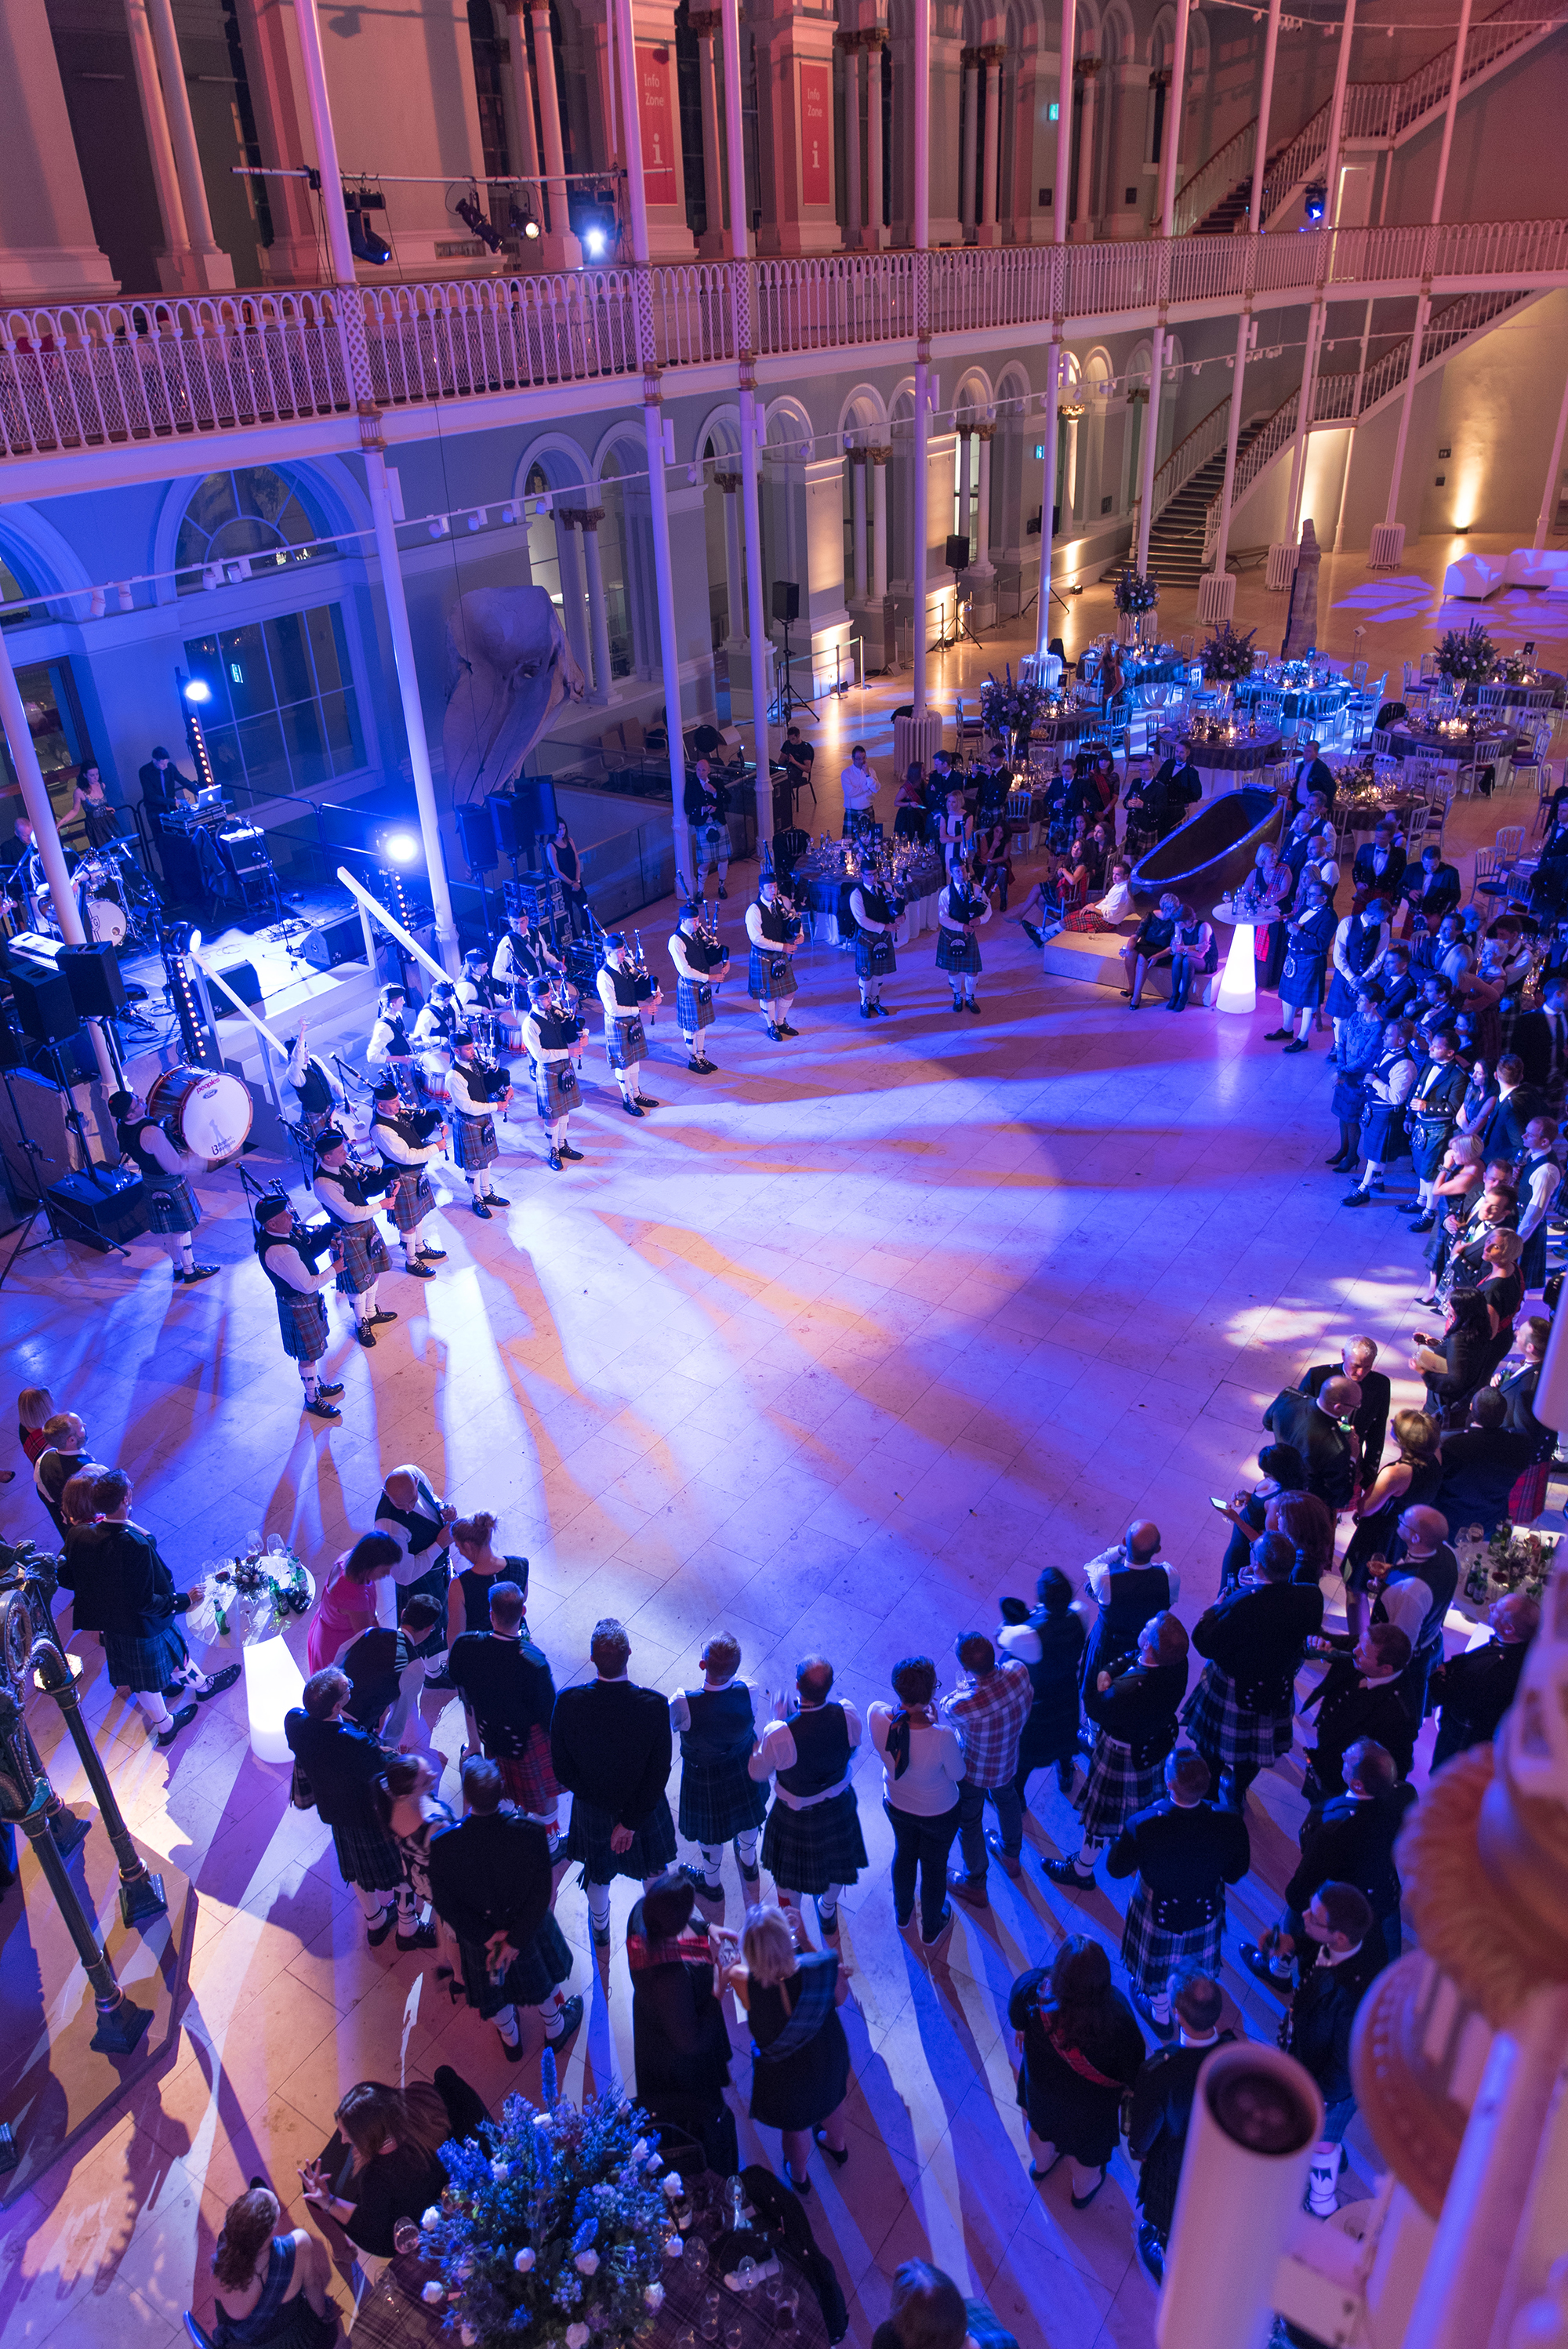 Beat the retreat! The Grand Gallery at the National Museum of Scotland is the perfect location for a traditional Scottish ceilidh.